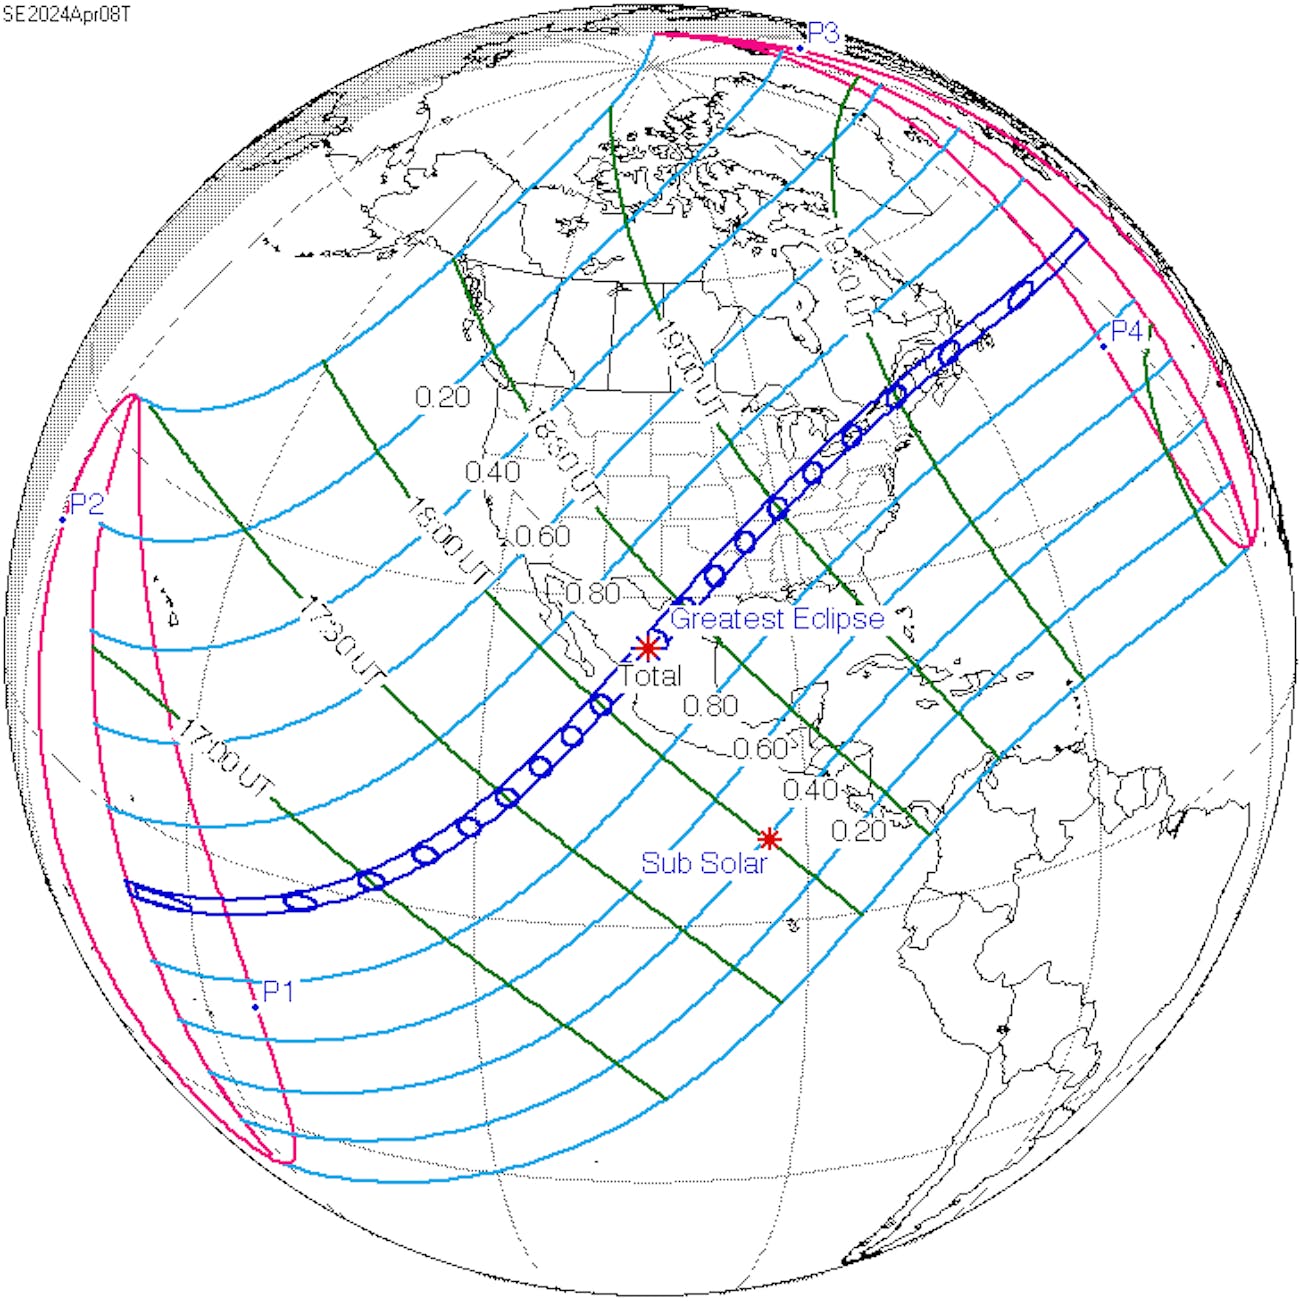 Where to See the Next U.S. Total Solar Eclipse in 2024